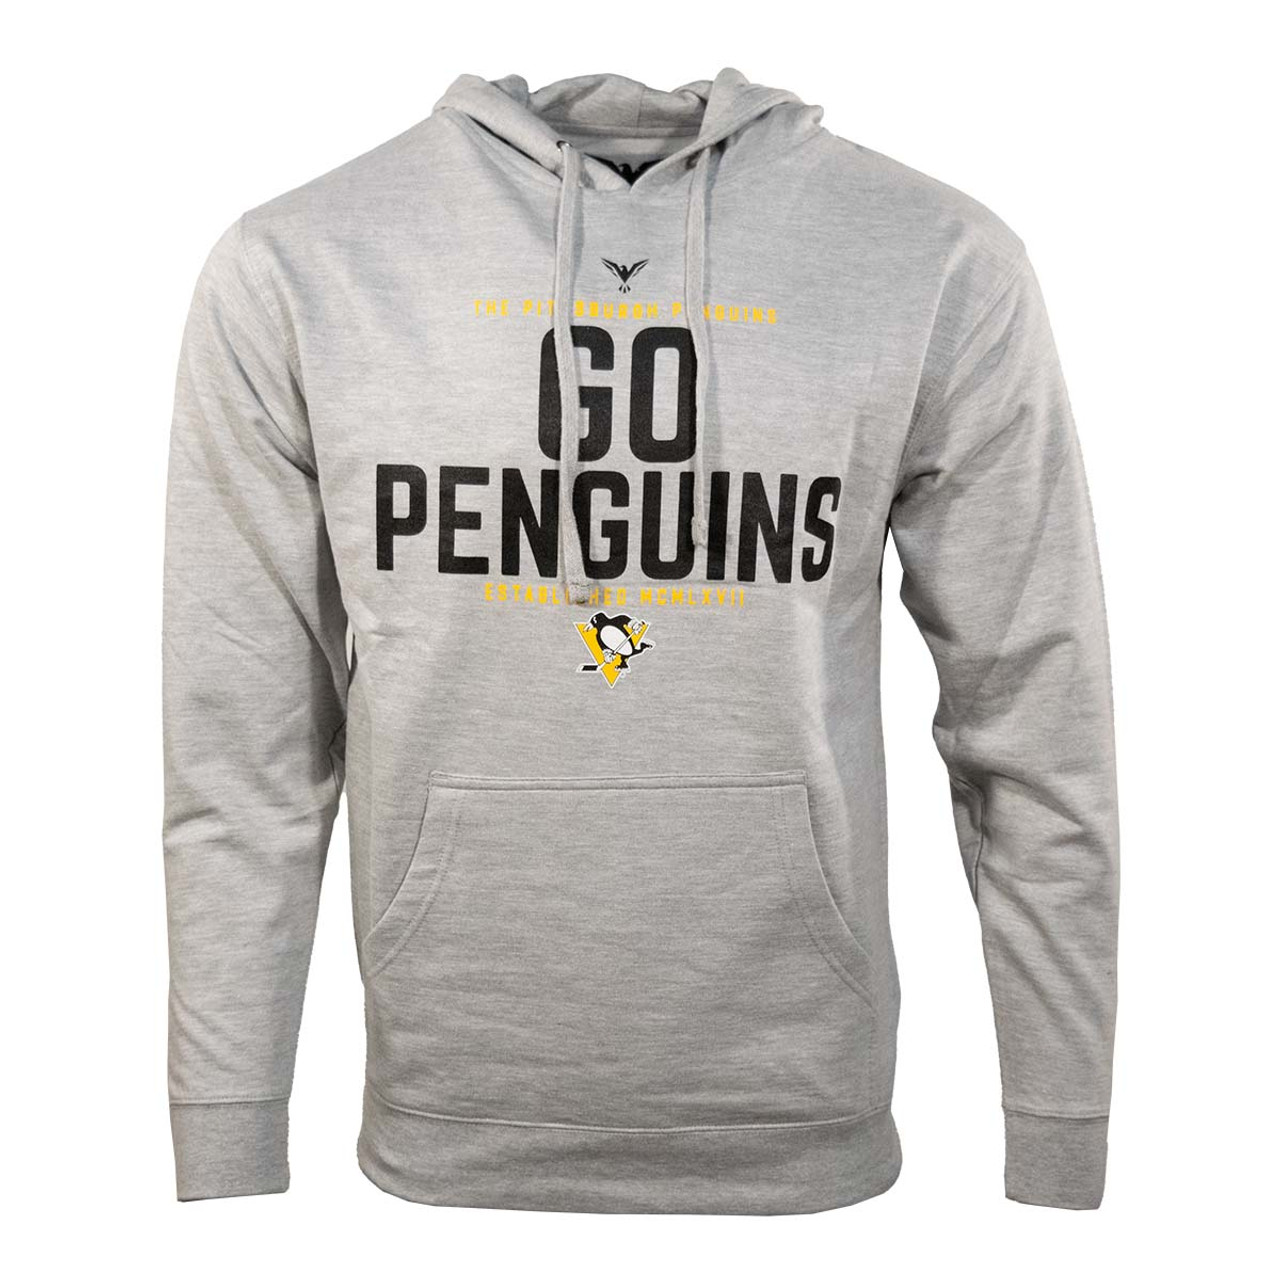 Official Pittsburgh Penguins Let's Go Pens Shirt, hoodie, sweater